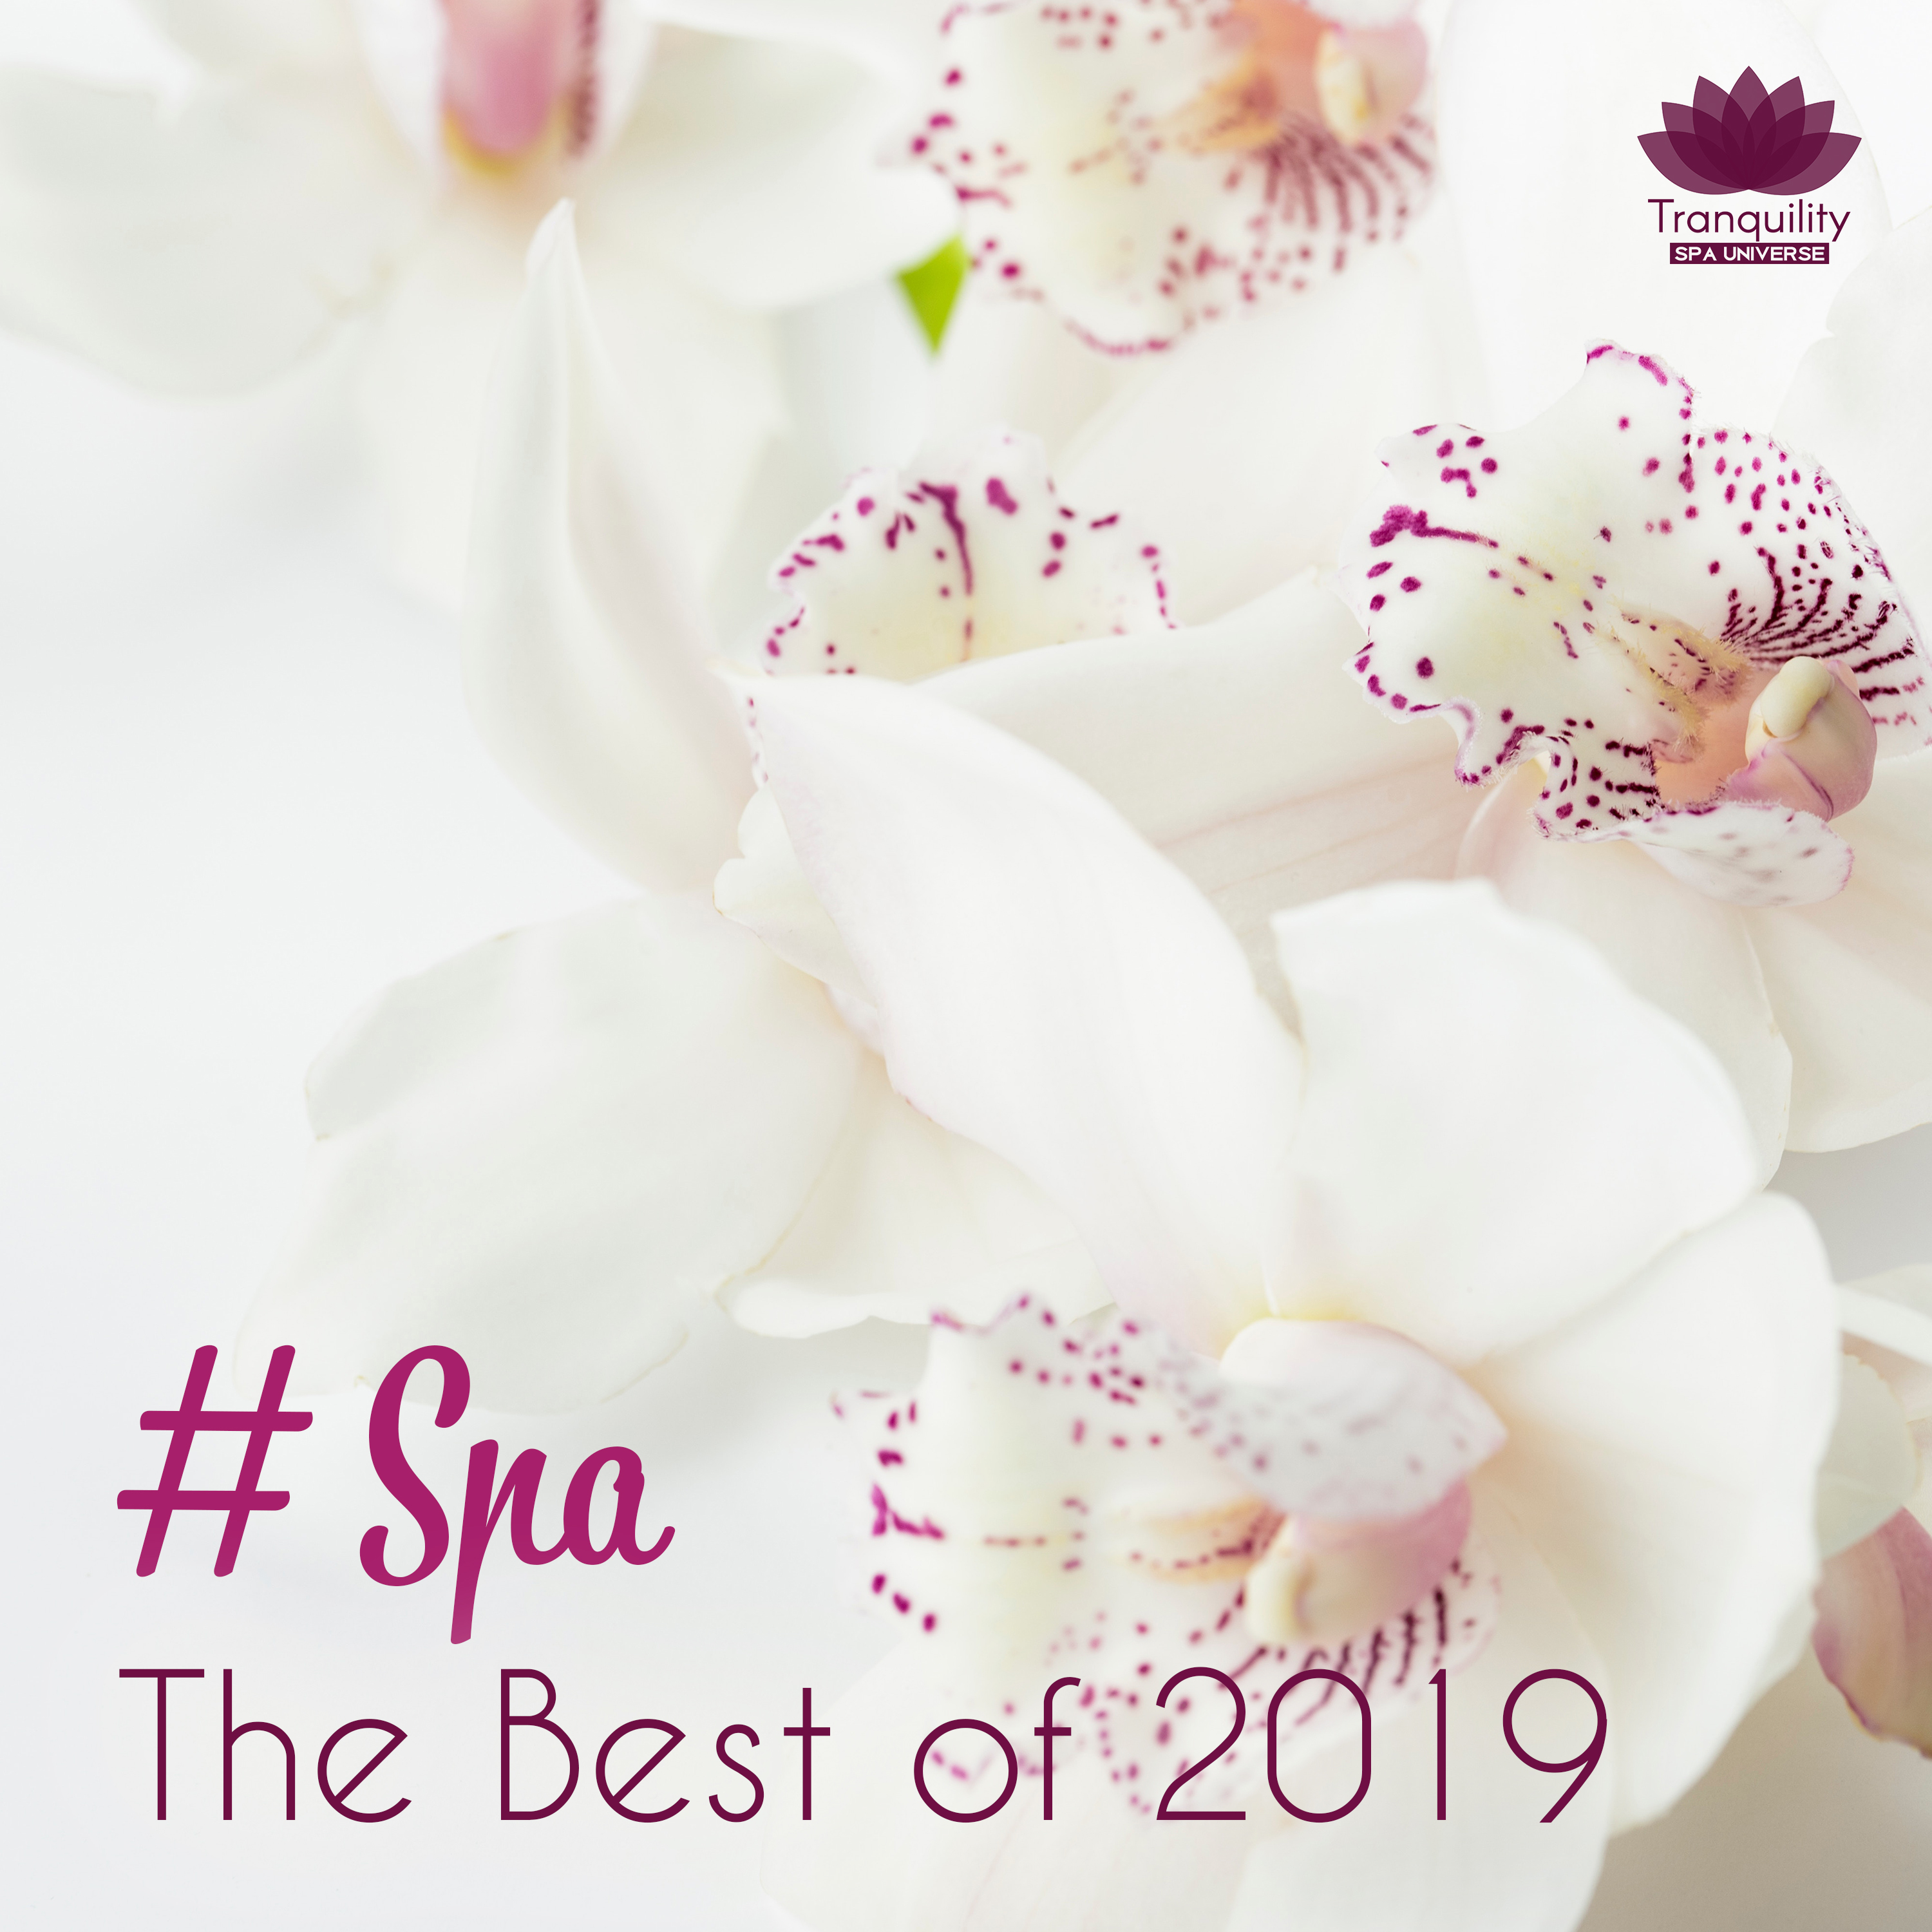 # Spa (The Best of 2019, Tranquility & Total Relax)